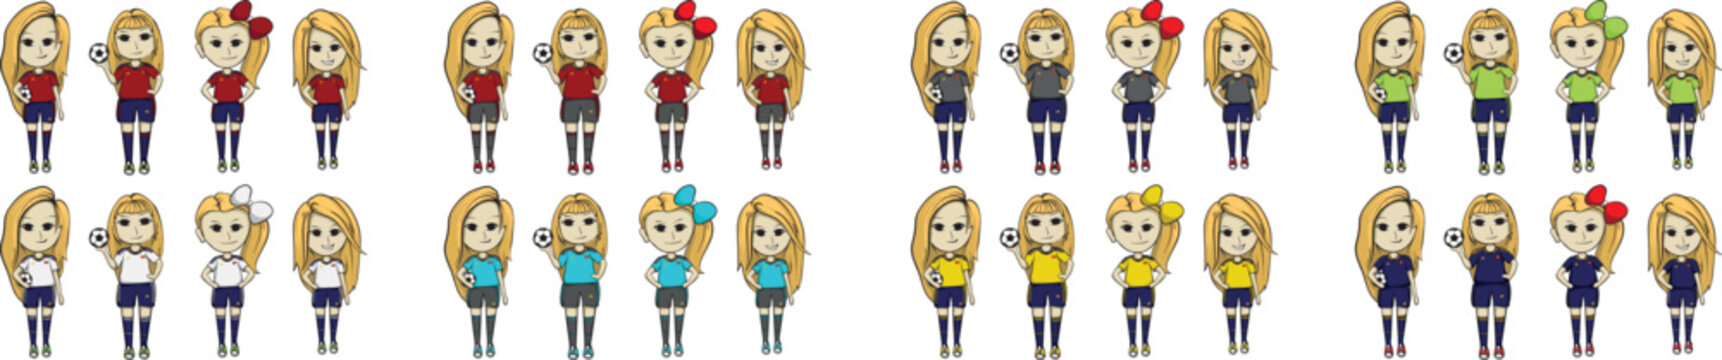 Vector female character wearing a cute soccer jersey with many variations of characters, usually used for decorative elements